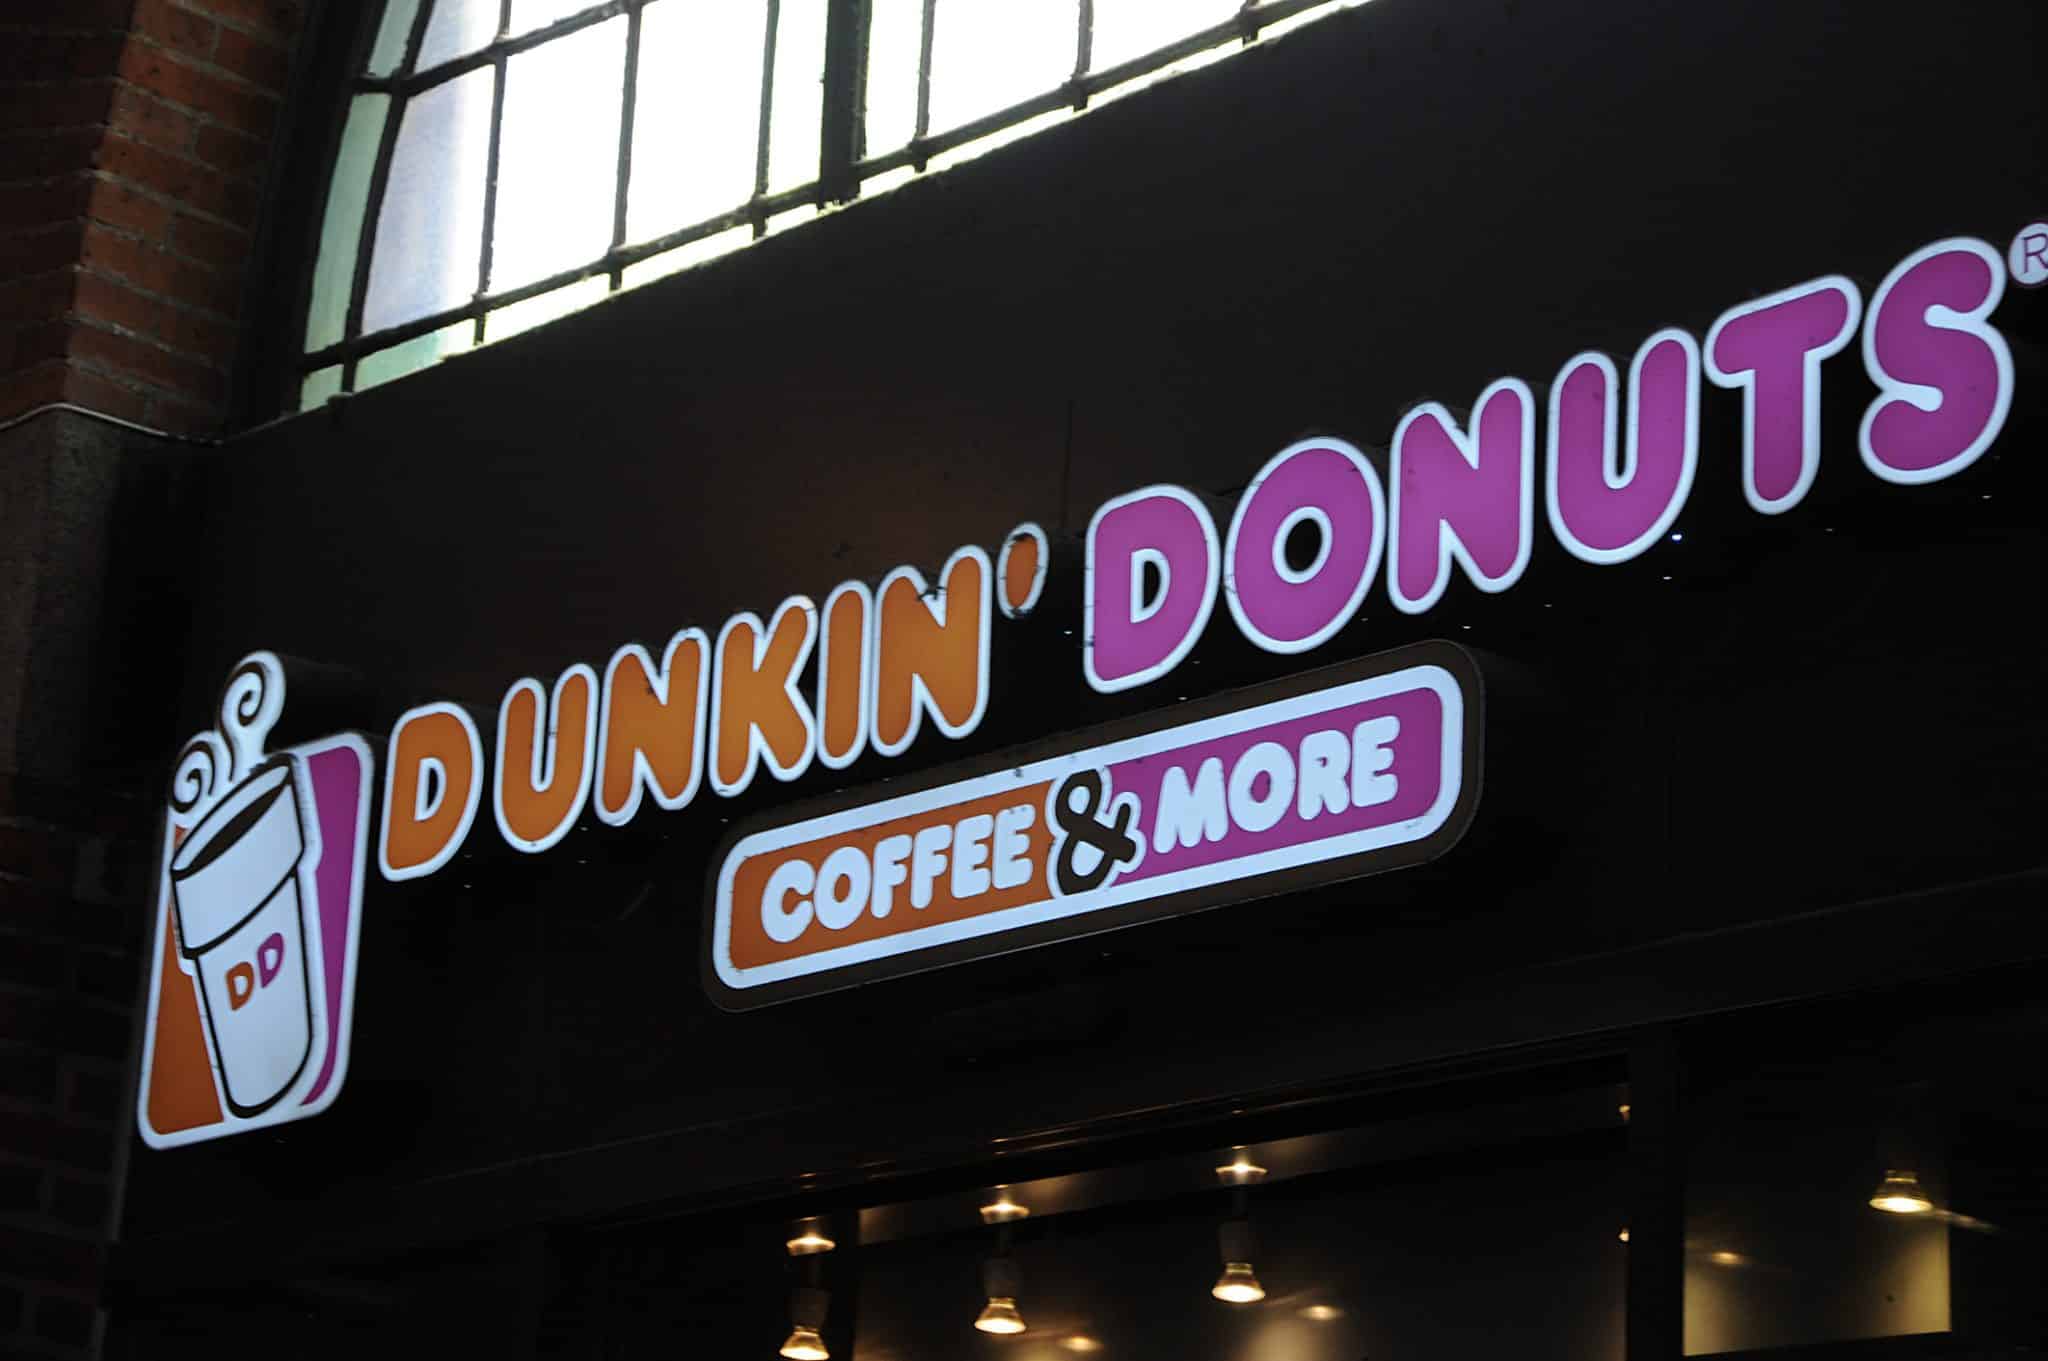 How To Order Coffee At Dunkin Donuts? 9 Things You Should ...